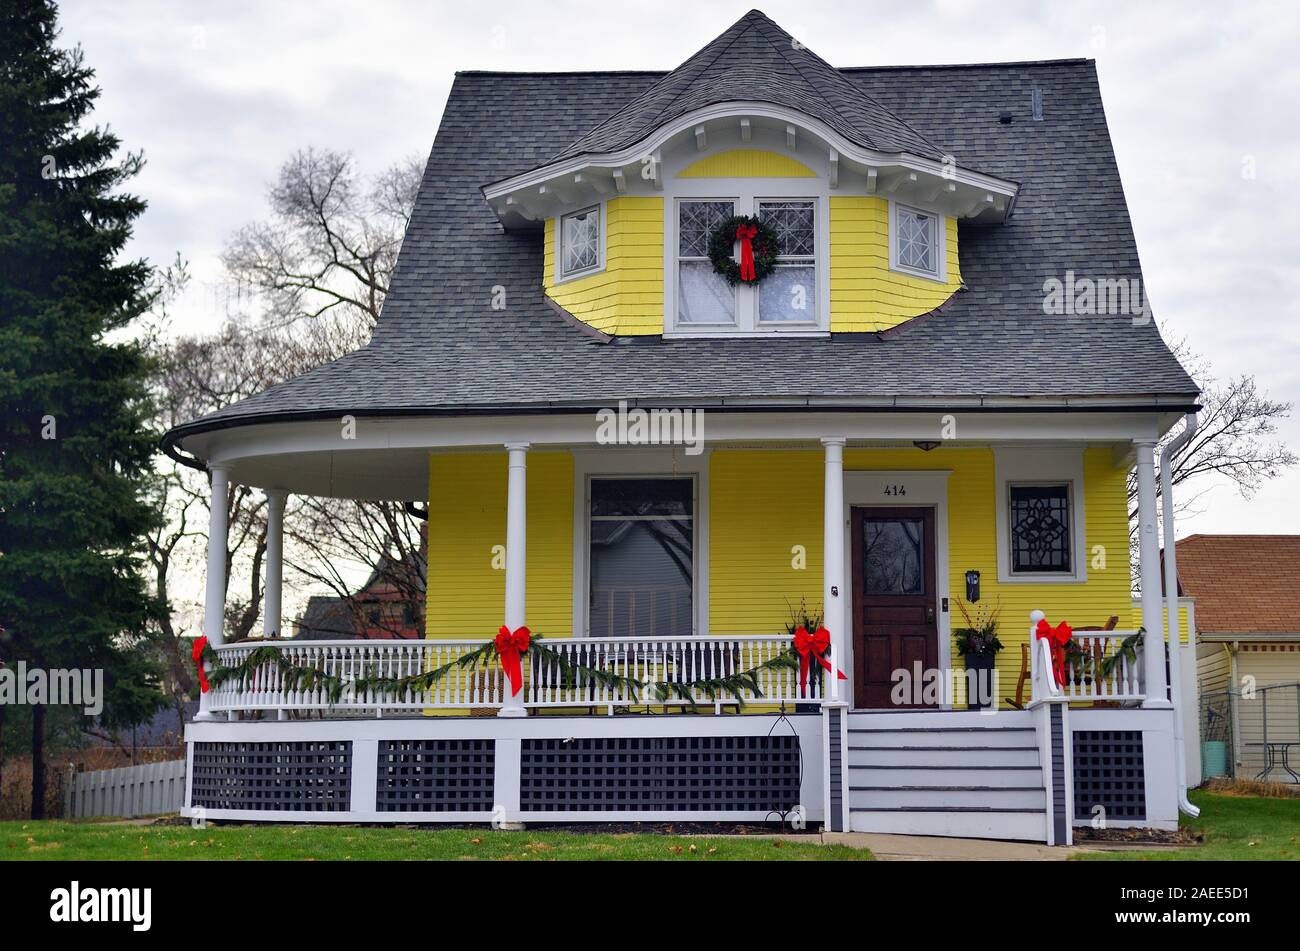 Elgin, Illinois, USA. A well maintained 19th century home with a wrap around porch presents a warm and inviting Christmas appearance. Stock Photo